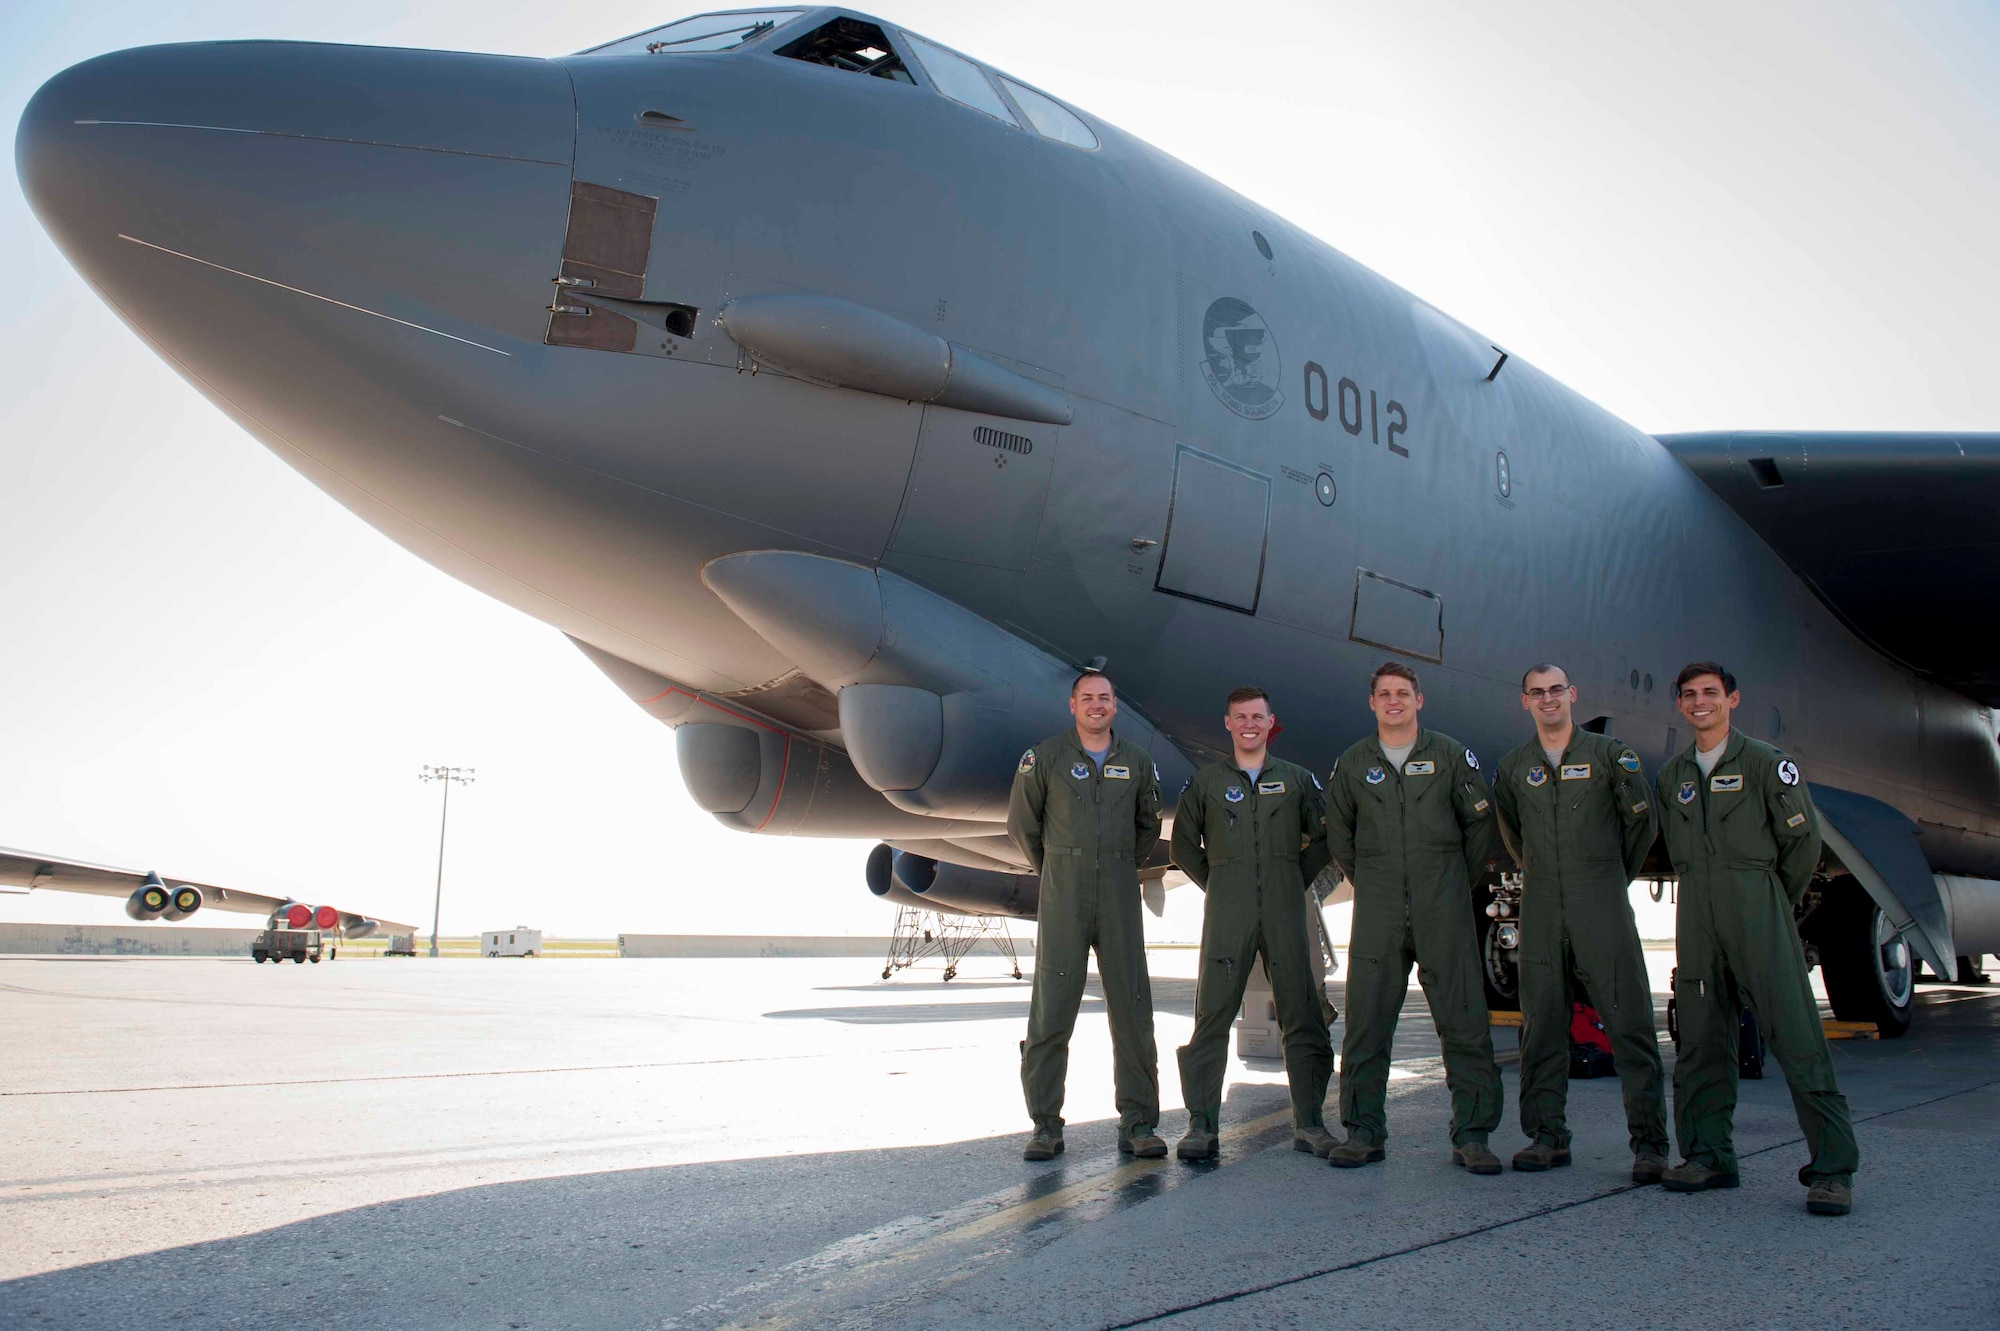 A 69th Bomb Squadron crew poses in front of a B-52H Stratofortress at Minot Air Force Base, N.D., July 31, 2015. Along with four 69th BS aircraft, approximately 180 Minot Airmen who participated in exercise Red Flag exercise returned from Nellis AFB, Nev. (U.S. Air Force photo/Airman 1st Class Sahara L. Fales)